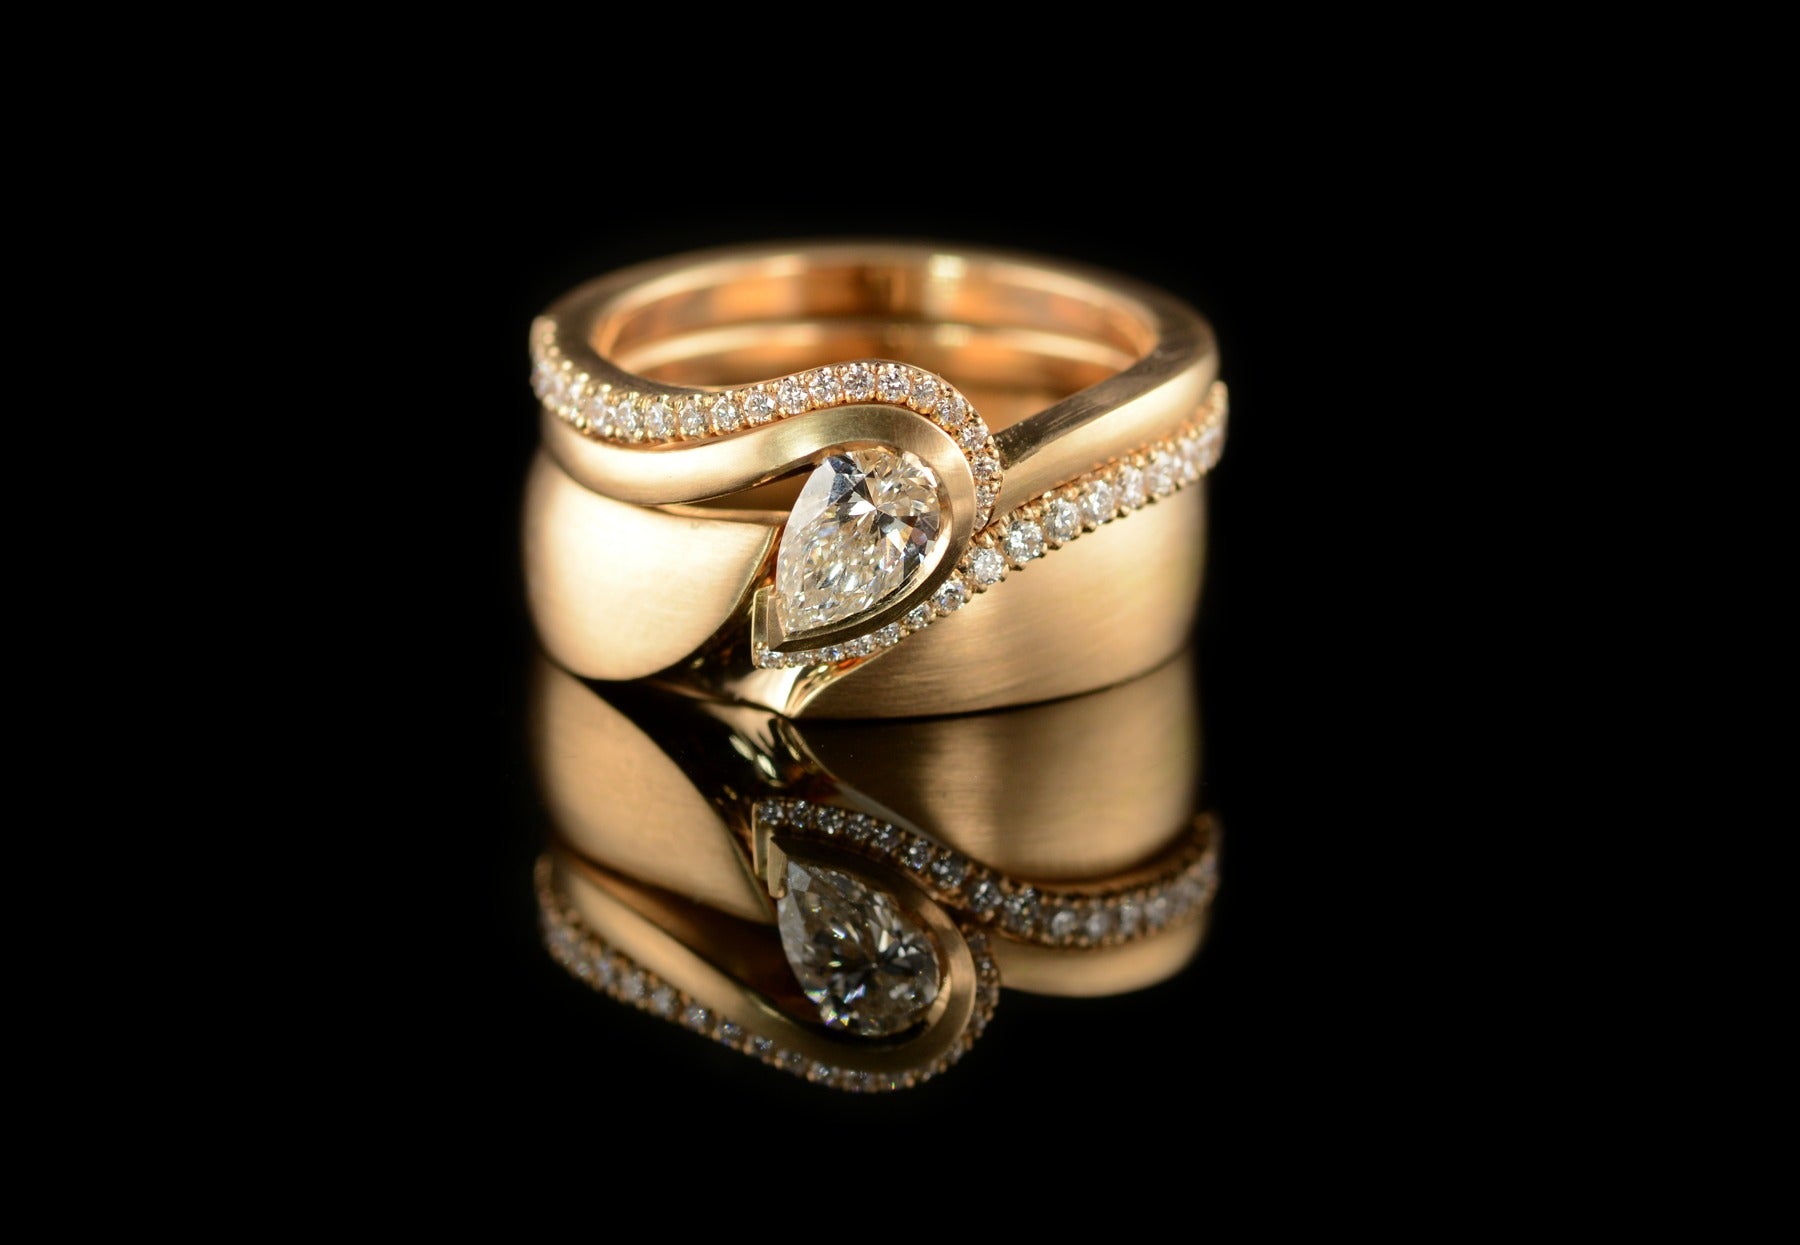 Pear diamond engagement ring with matching his and hers wedding rings ...